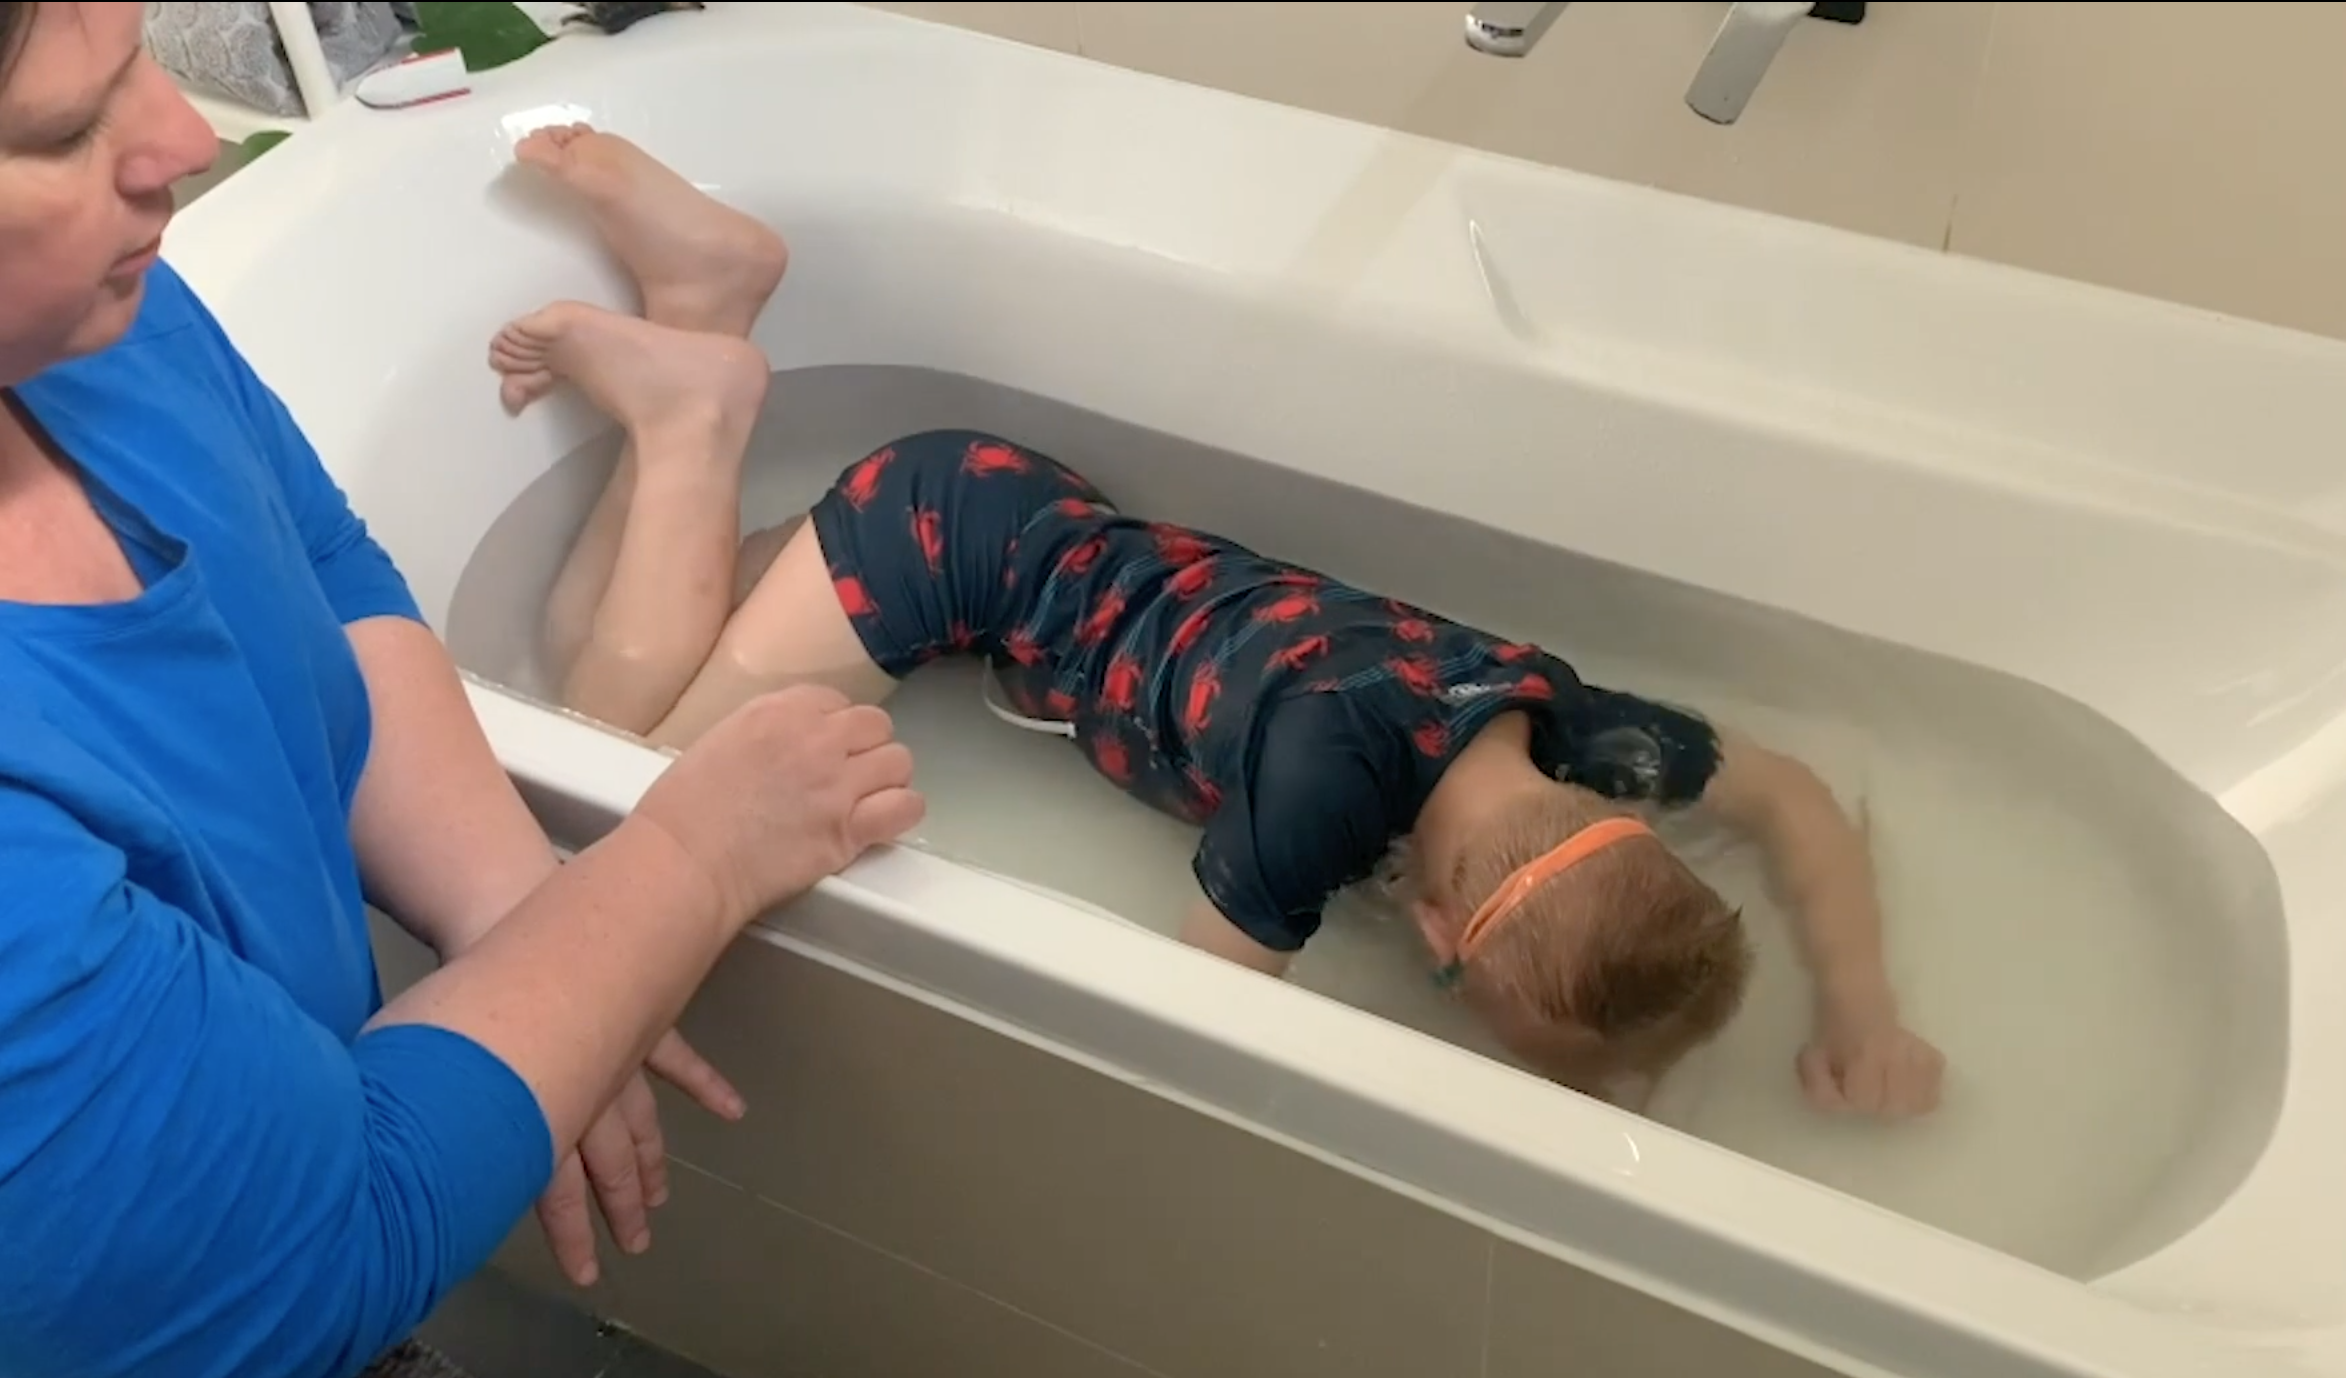 Yarra Leisure swim instructor Anna practicing putting eyes and ears underwater in a bath with her young son in the bath at home